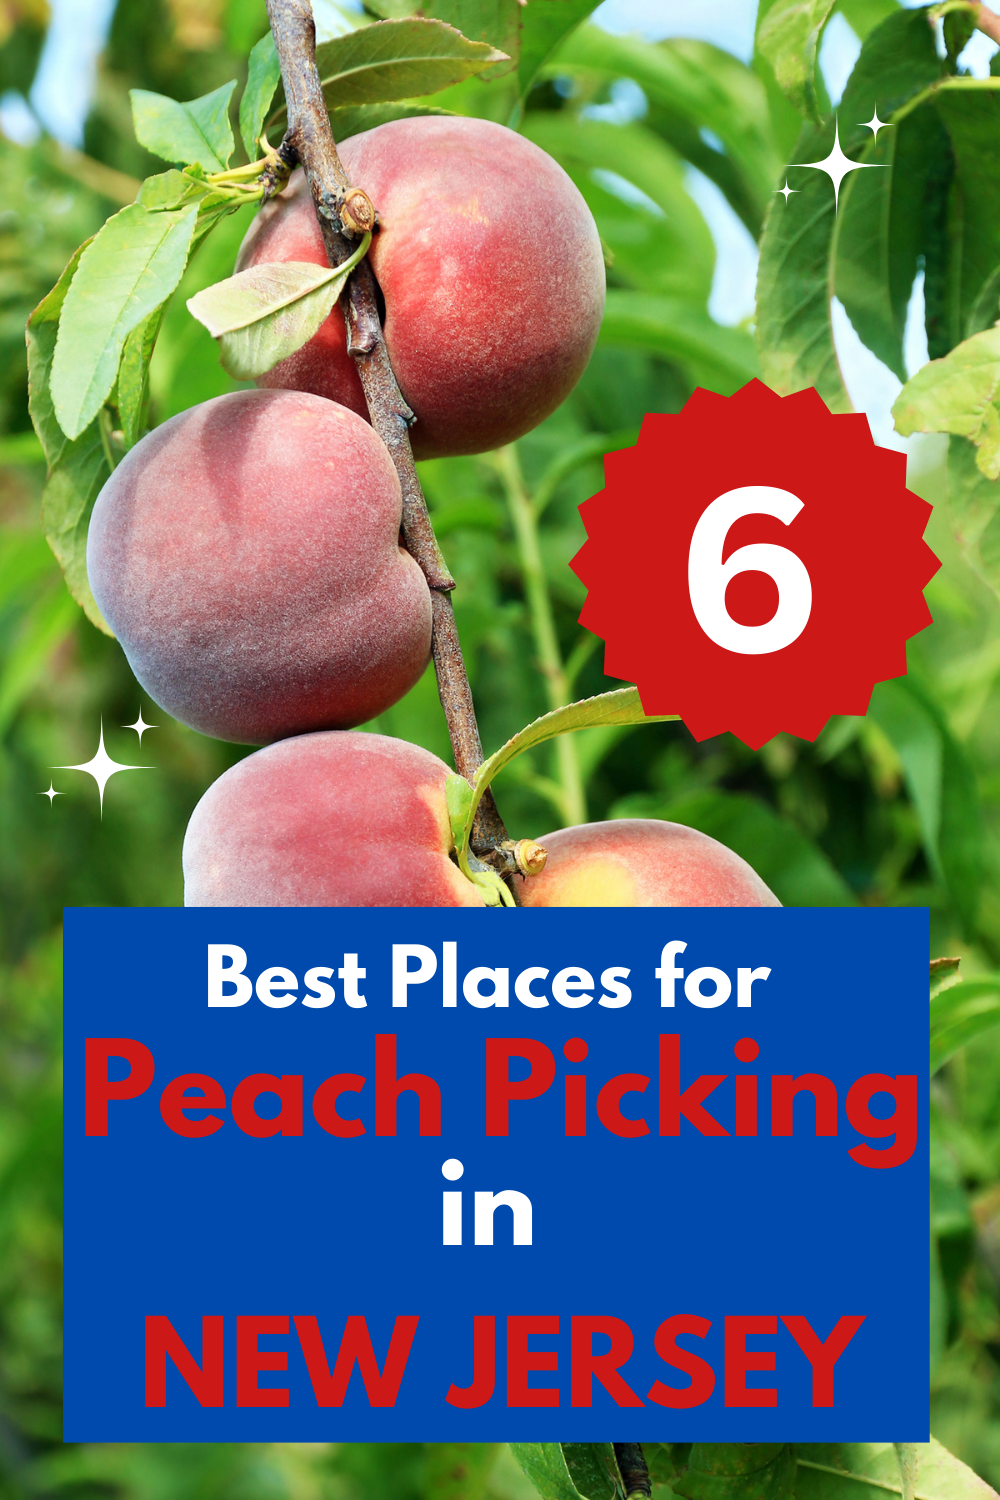 New Jersey Peach Picking Farms